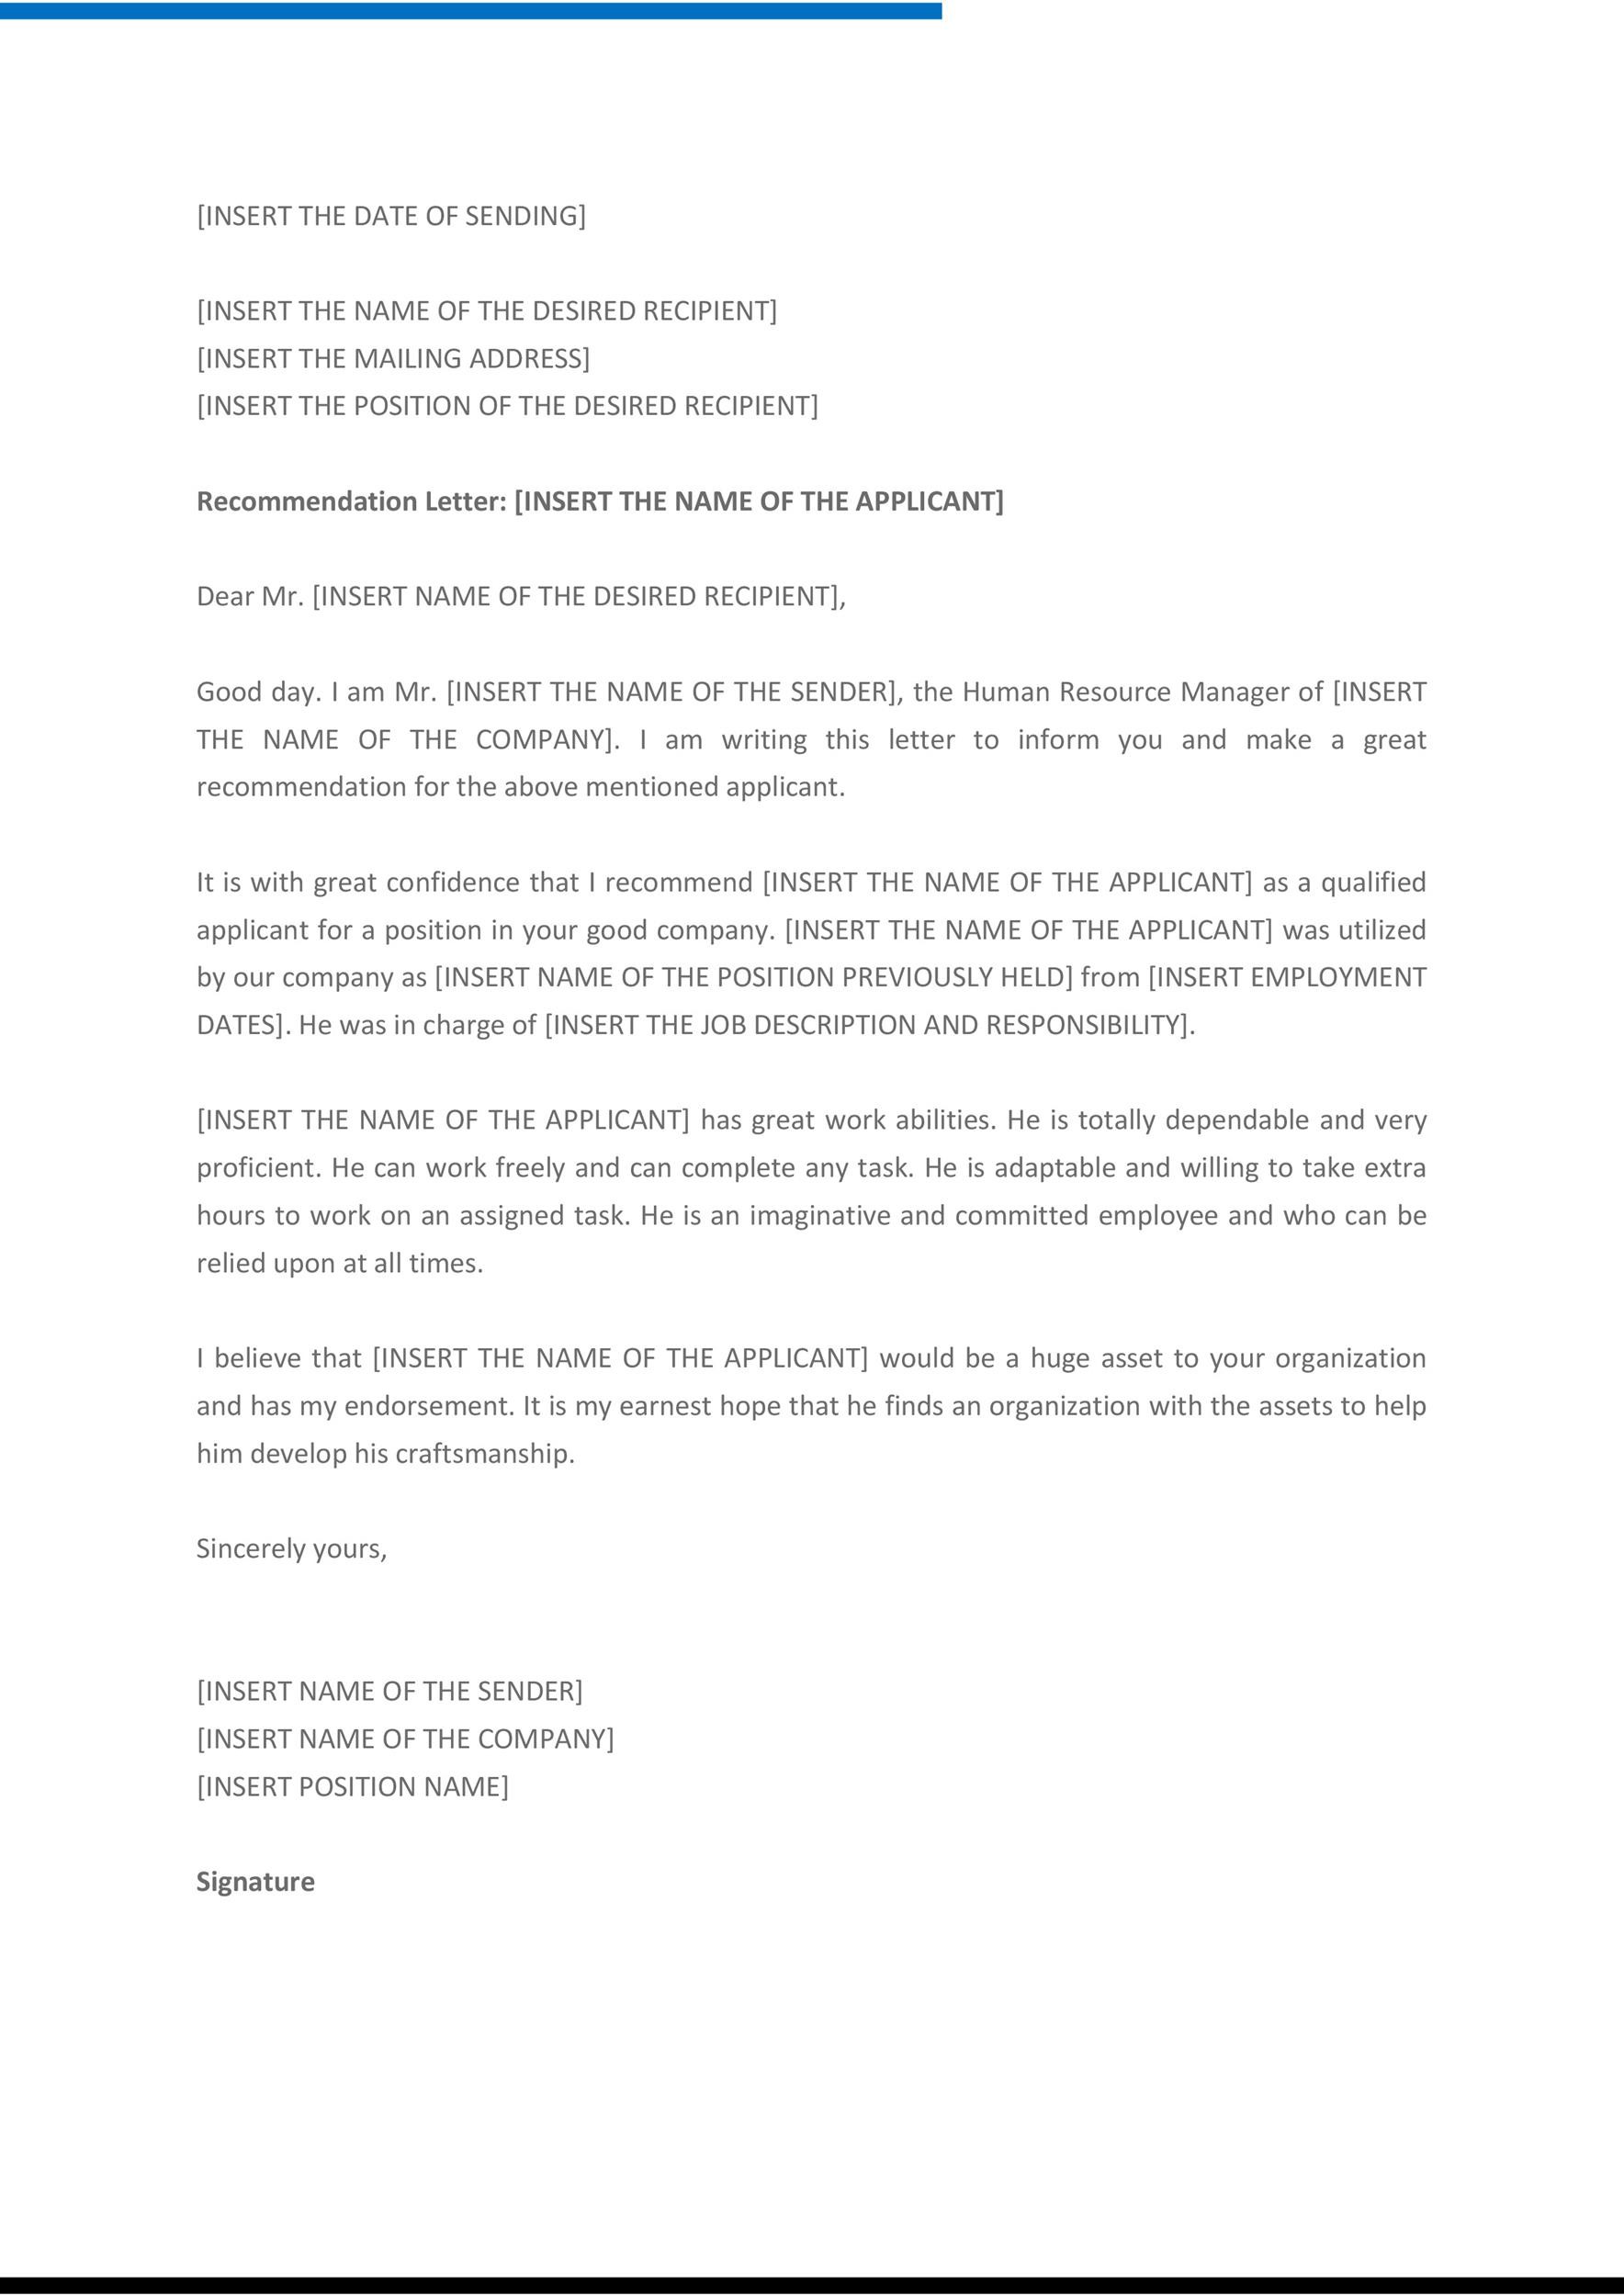 Free Recommendation Letter From Manager Template 18